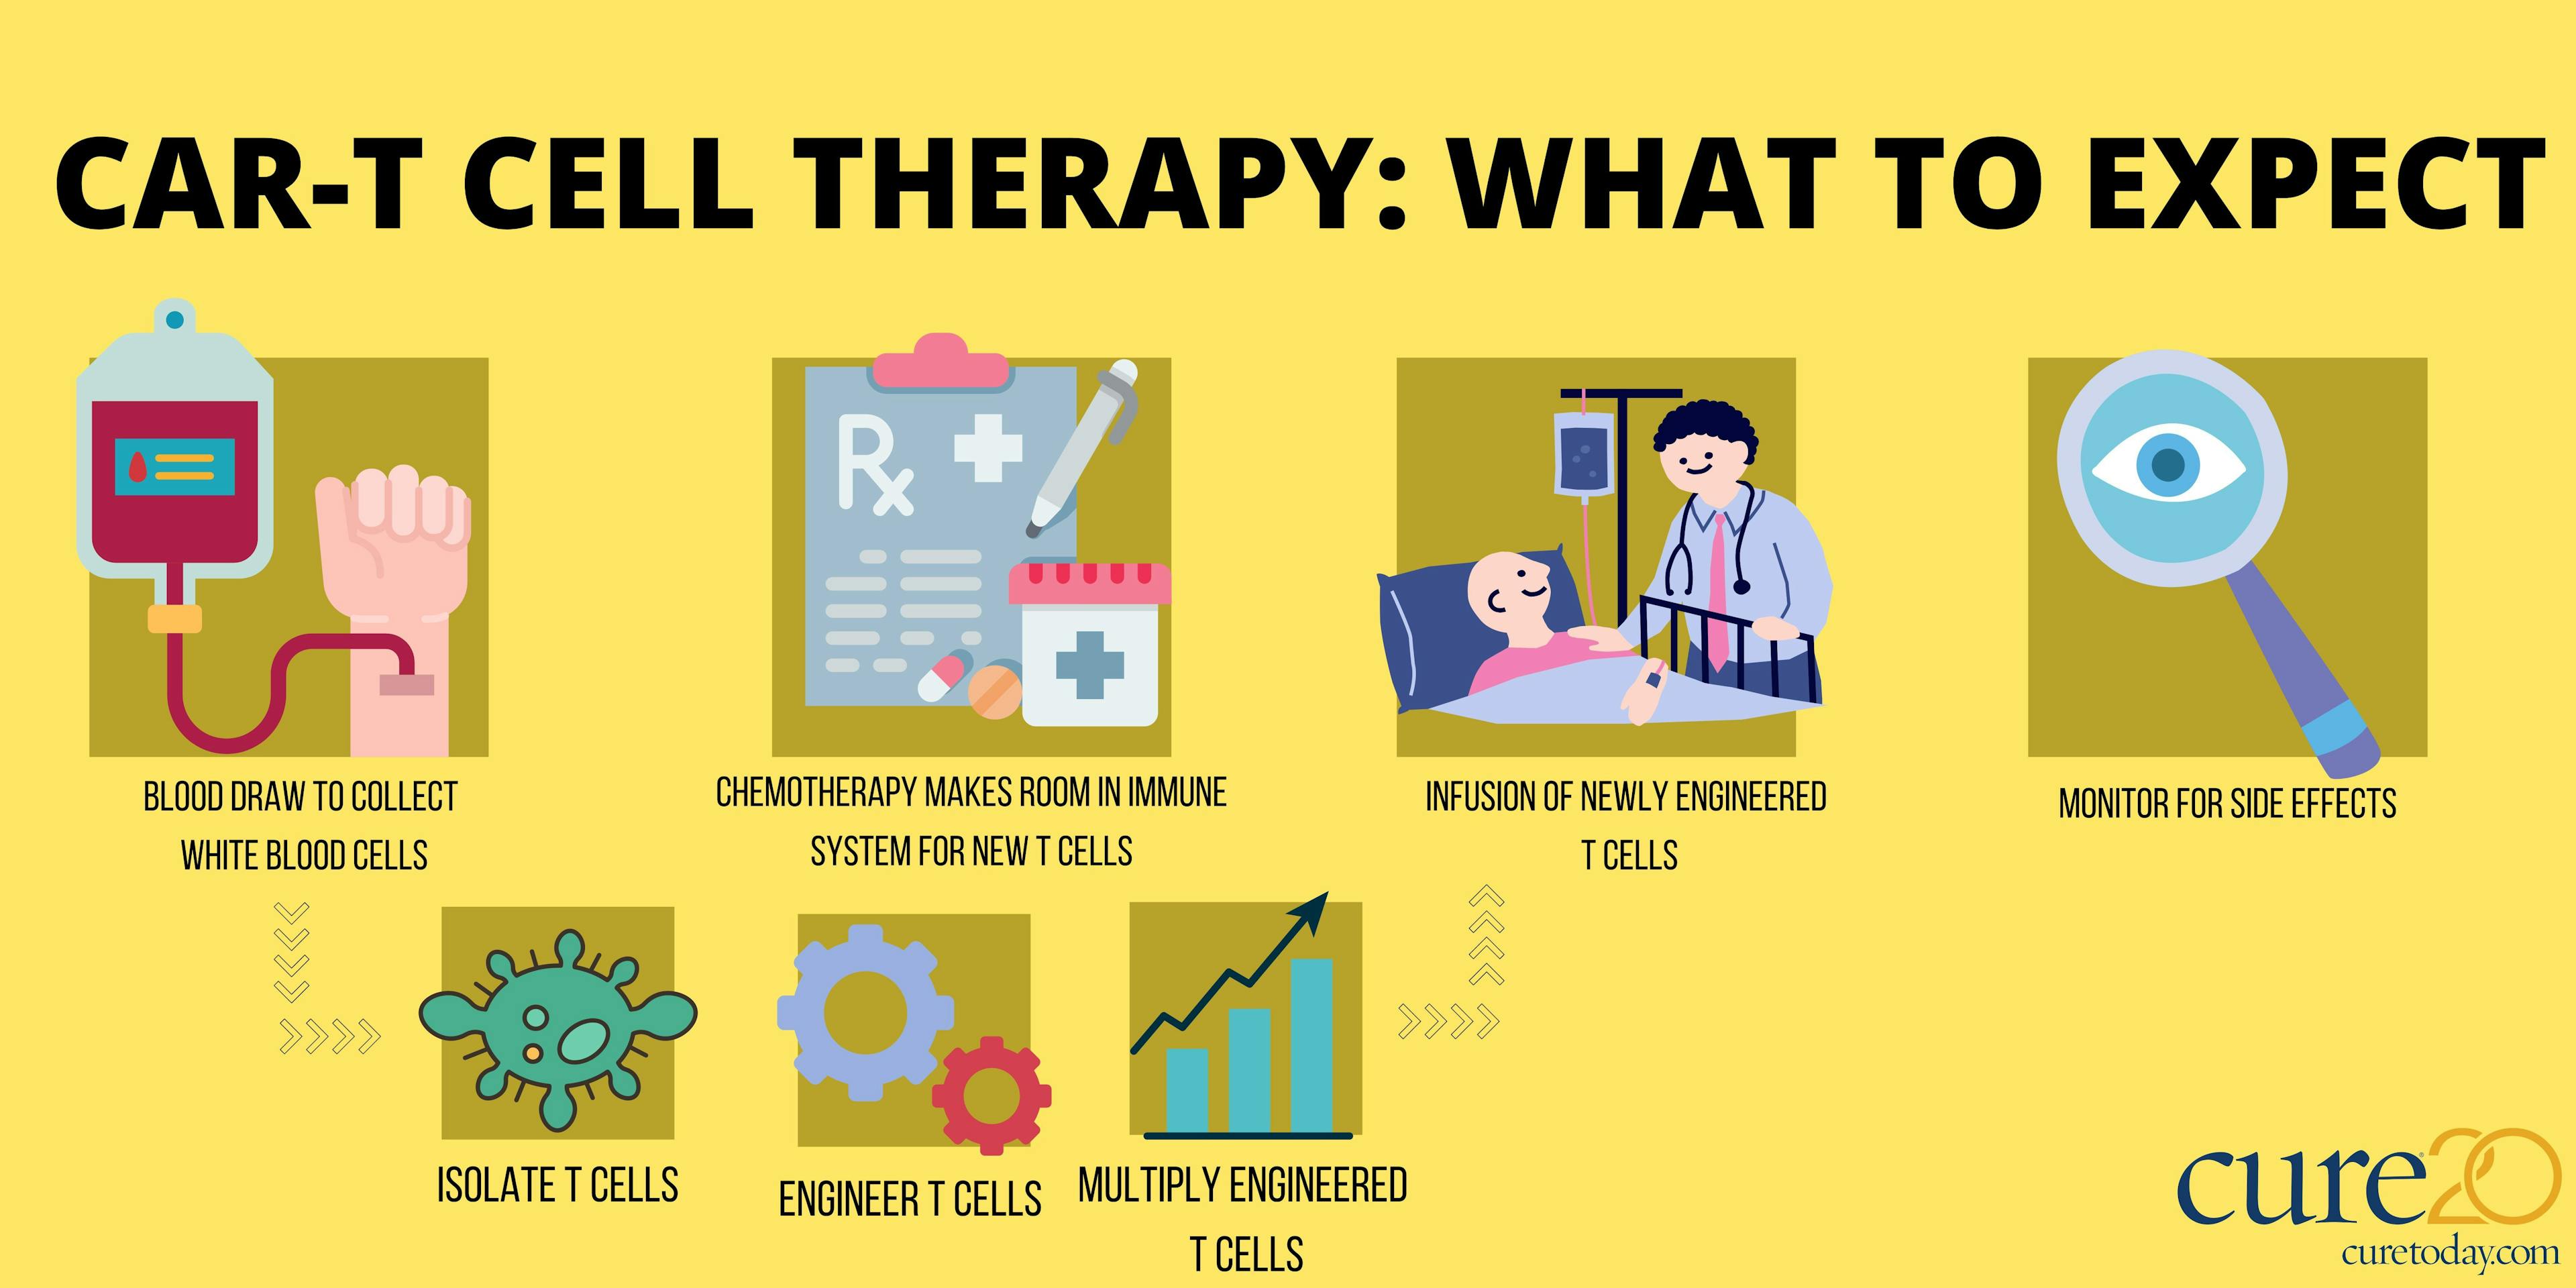 Infographic: what patients can expect with CAR-T cell therapy